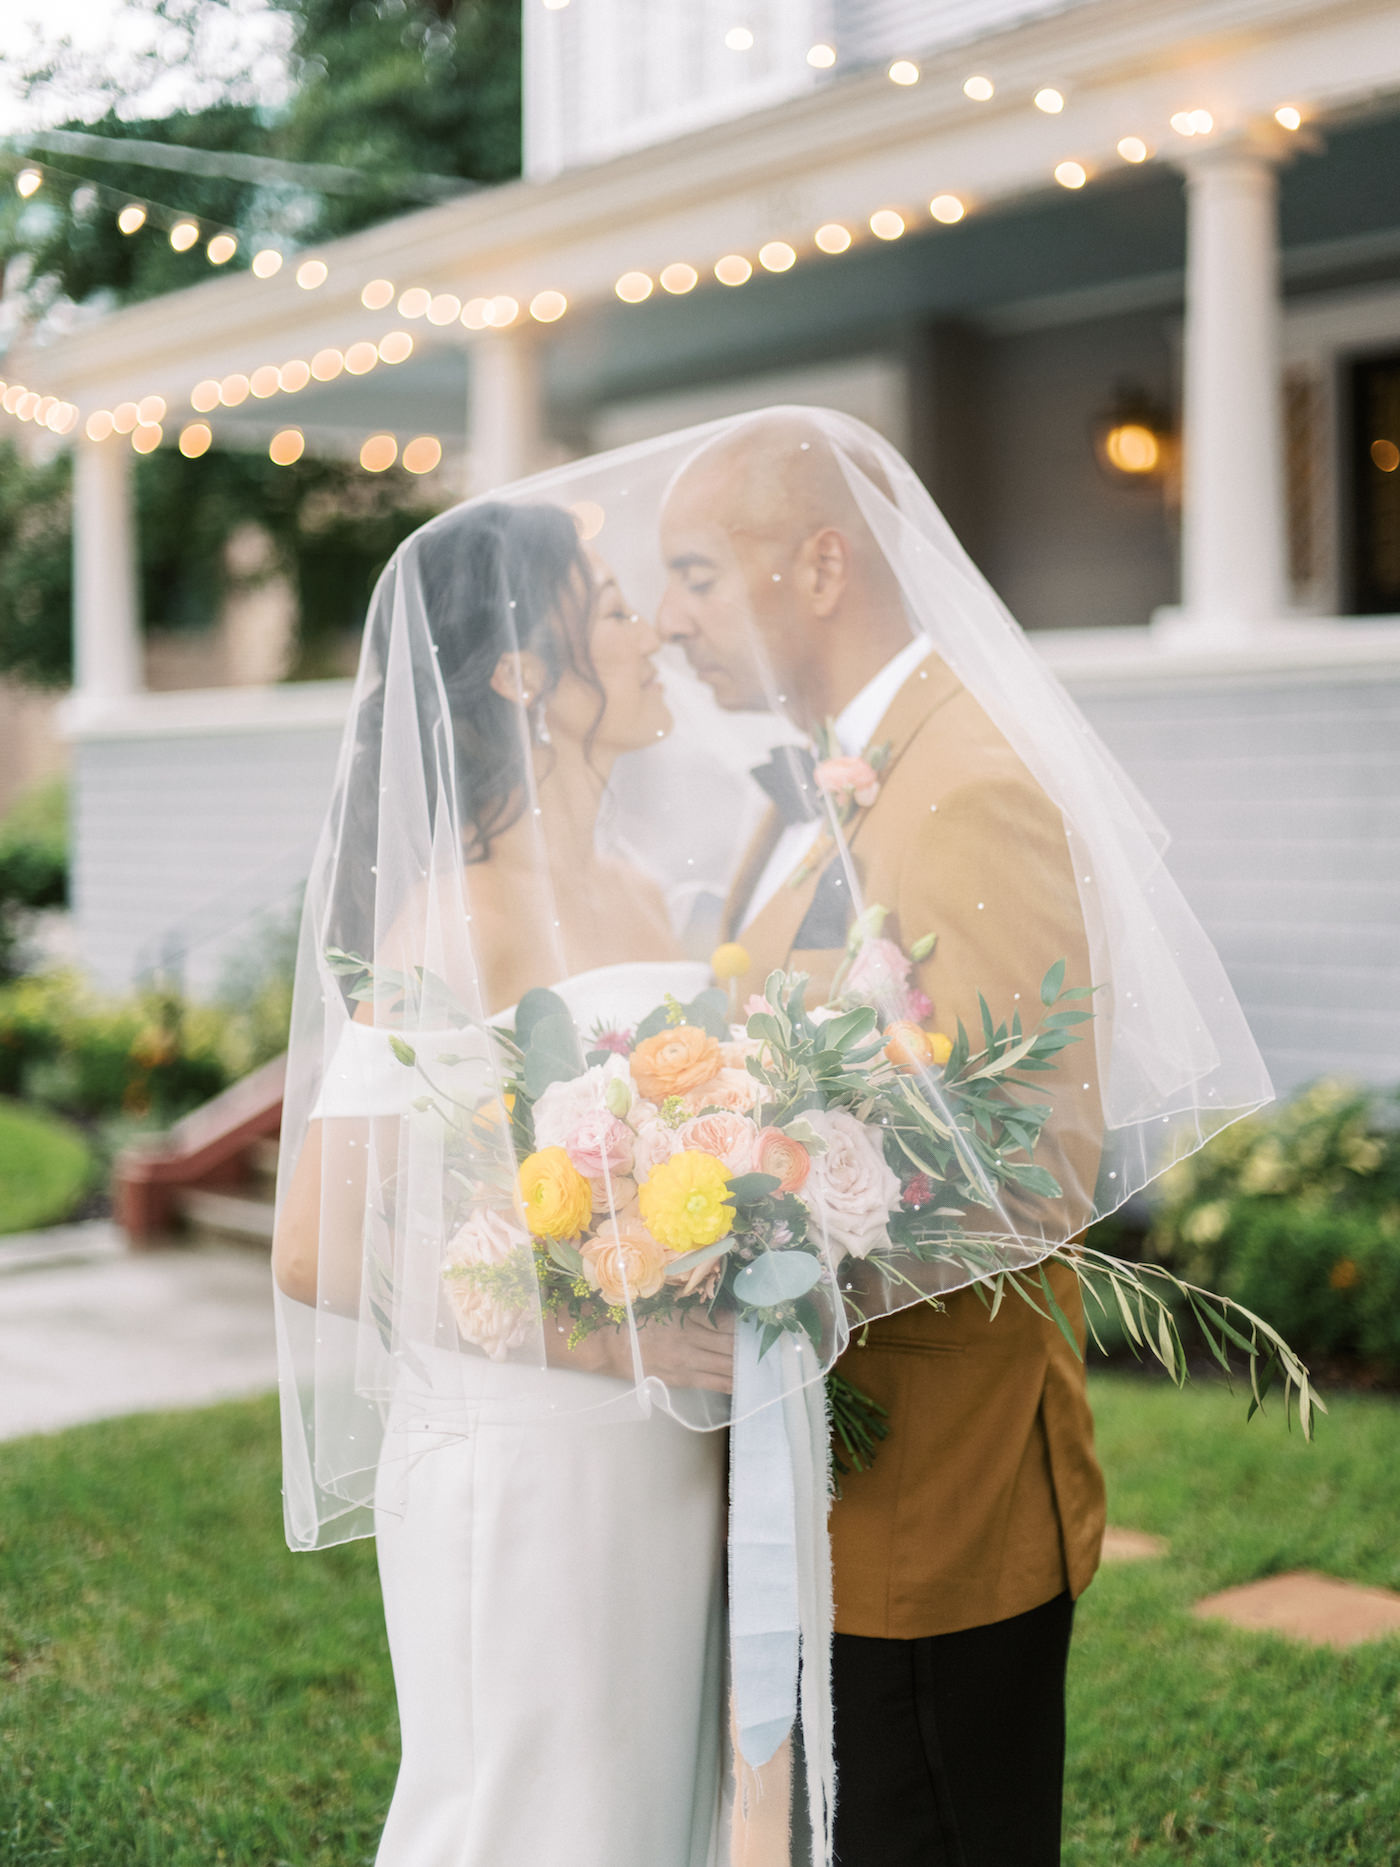 Tampa Bay Bride and Groom Intimate Portrait Under Bridal Veil During Cocktail Hour, Holding Vibrant Bouquet with Yellow, Pink, and Peach Floral Stems with Greenery | Florida Wedding Planner Kelly Kennedy Weddings and Events